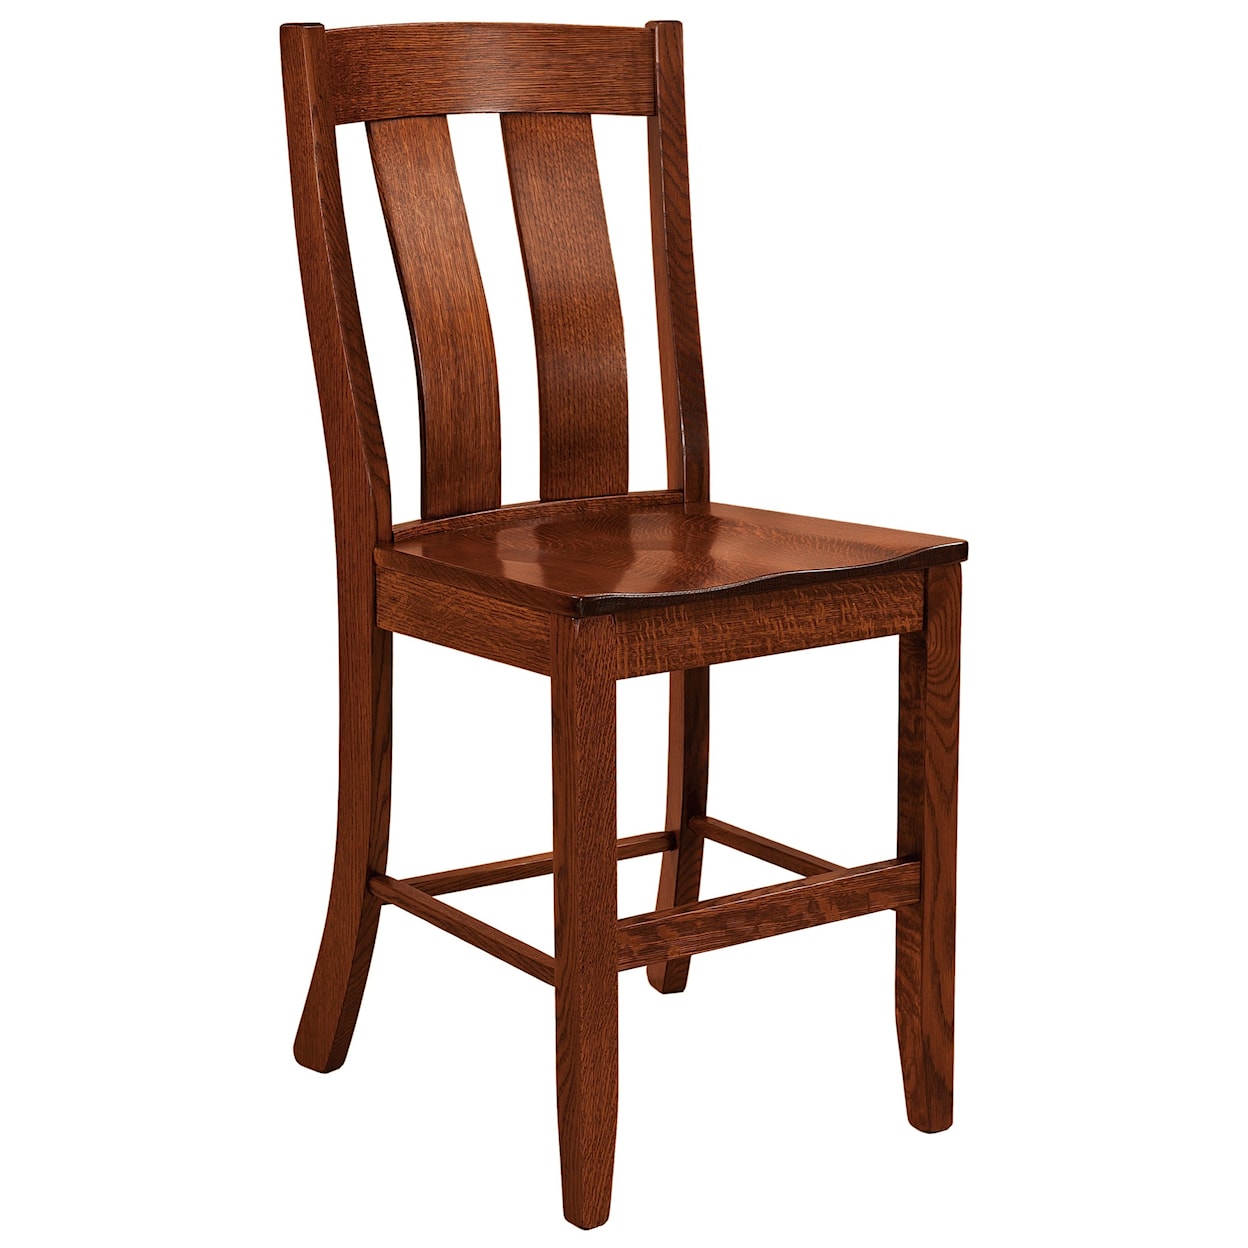 F&N Woodworking Laurie Stationary Bar Stool - Fabric Seat